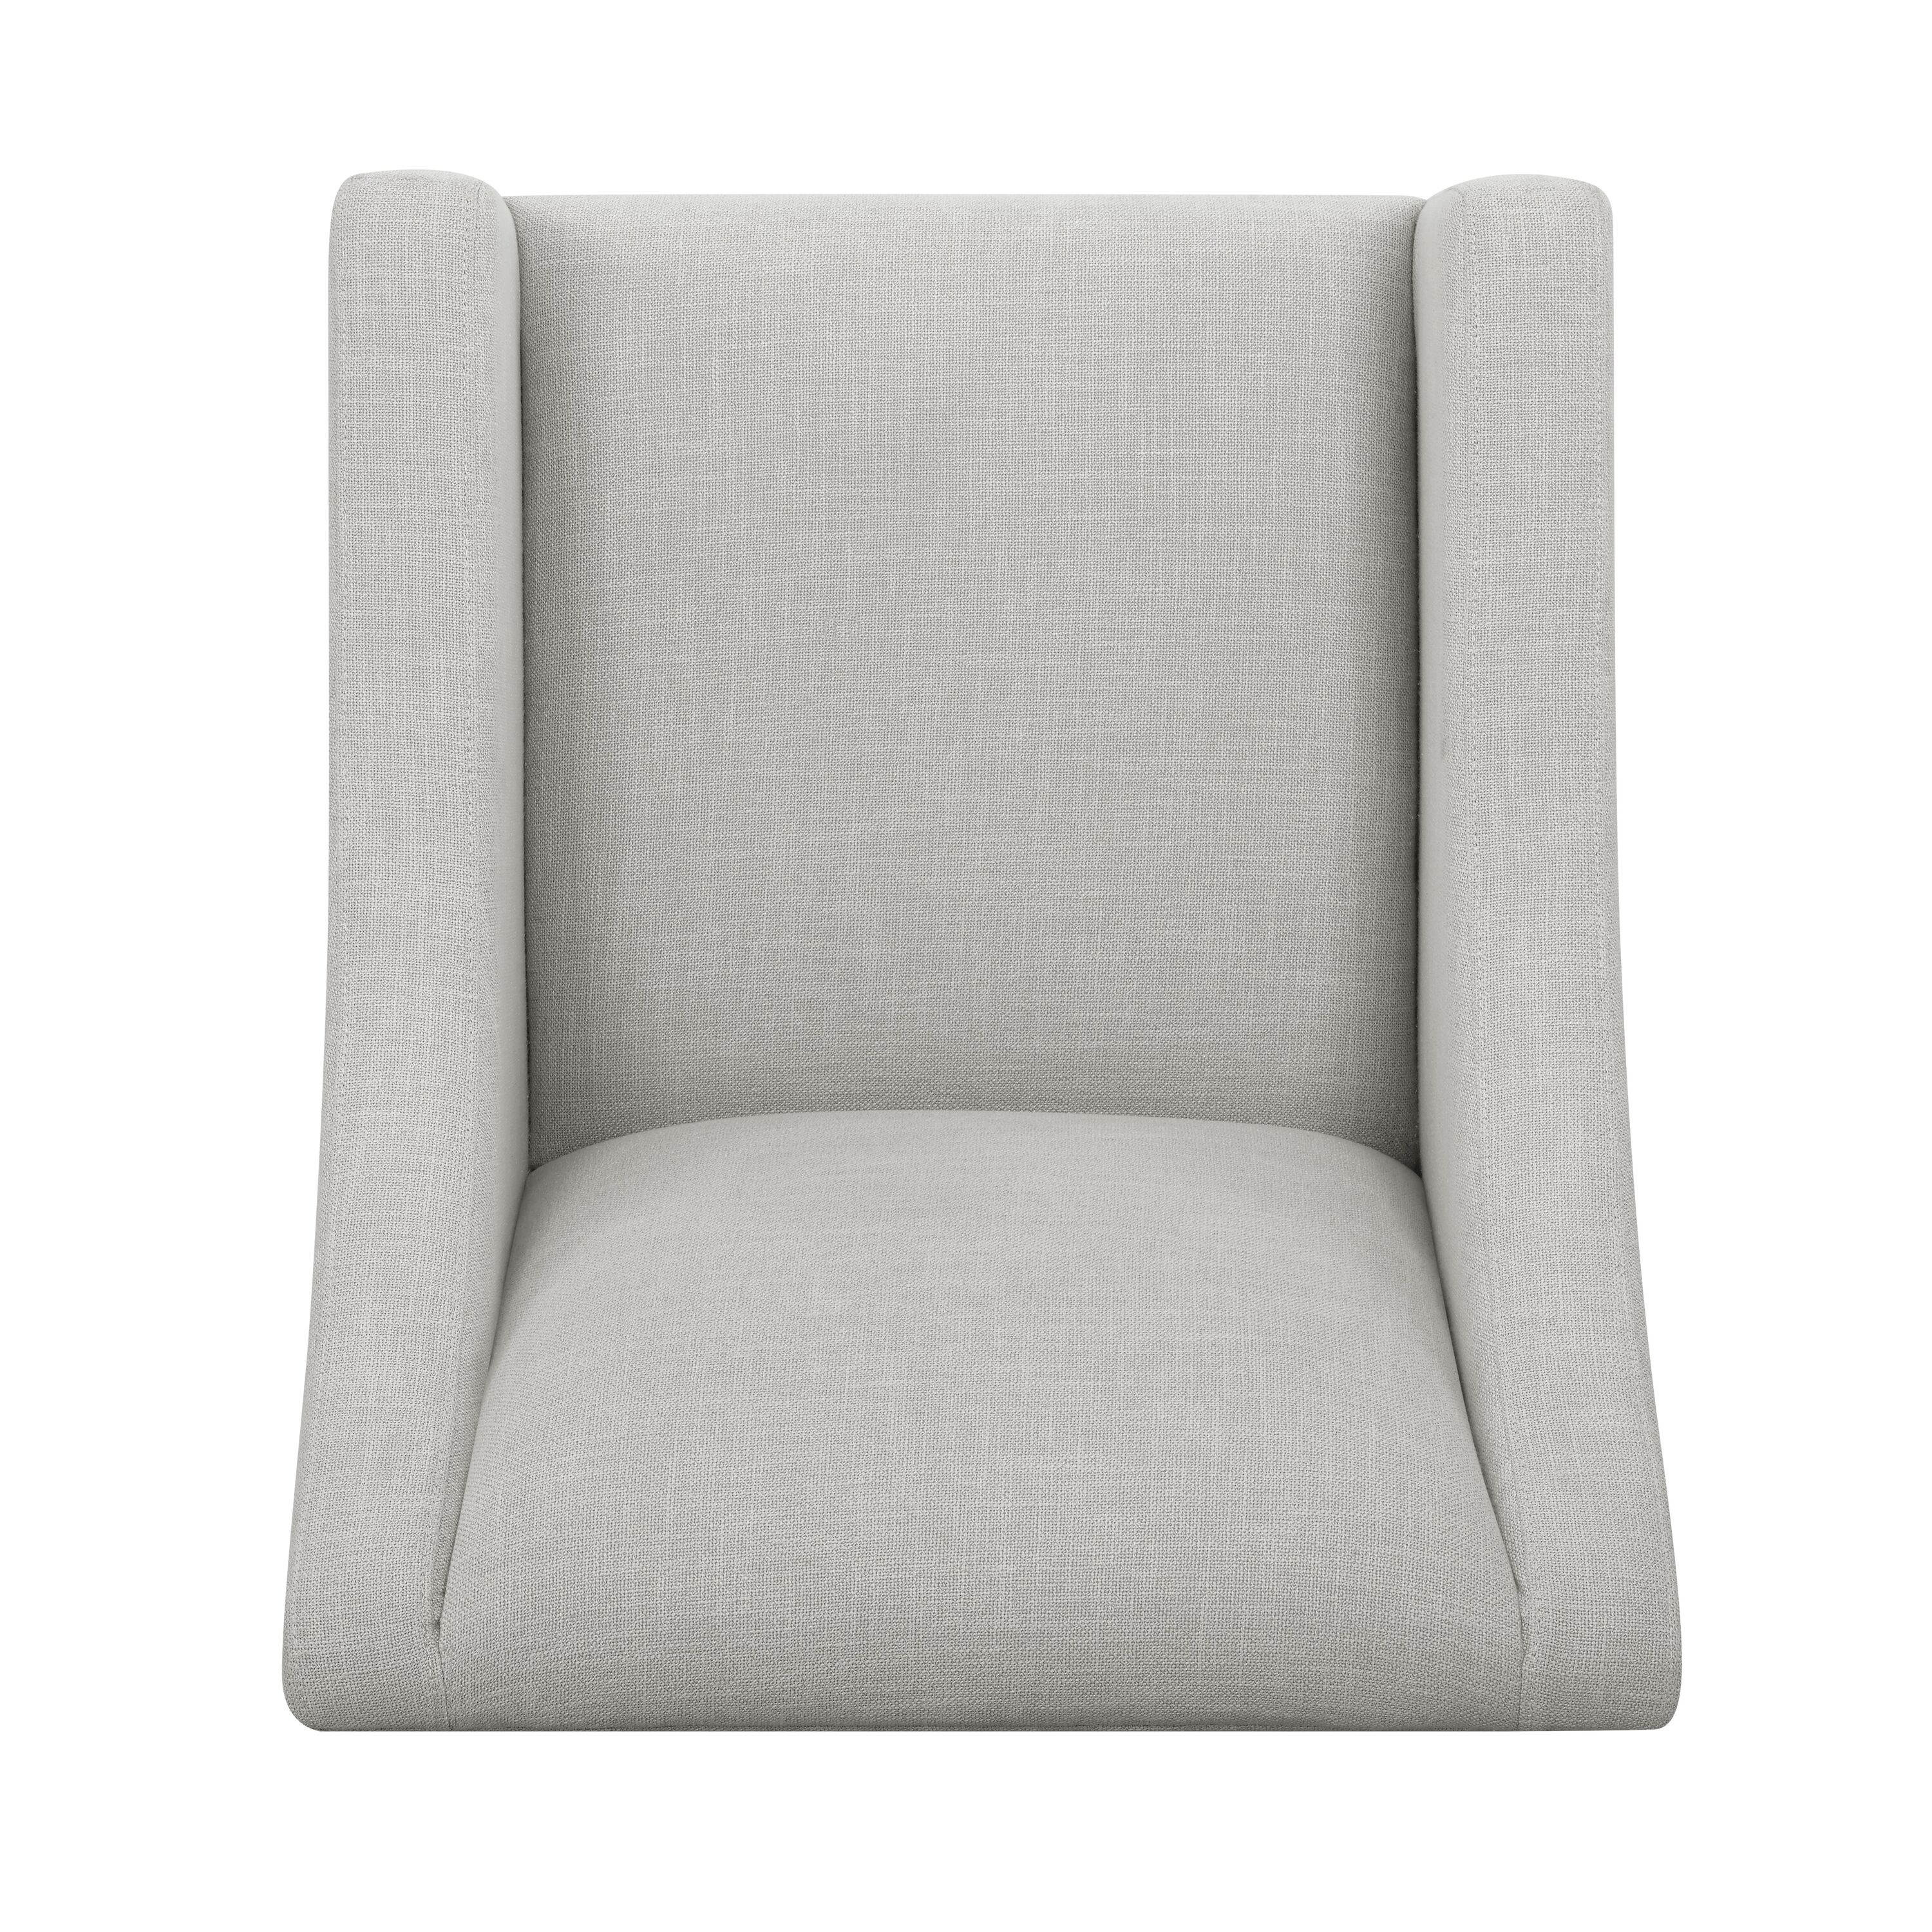 allen + roth Casual Gray Accent Chair at